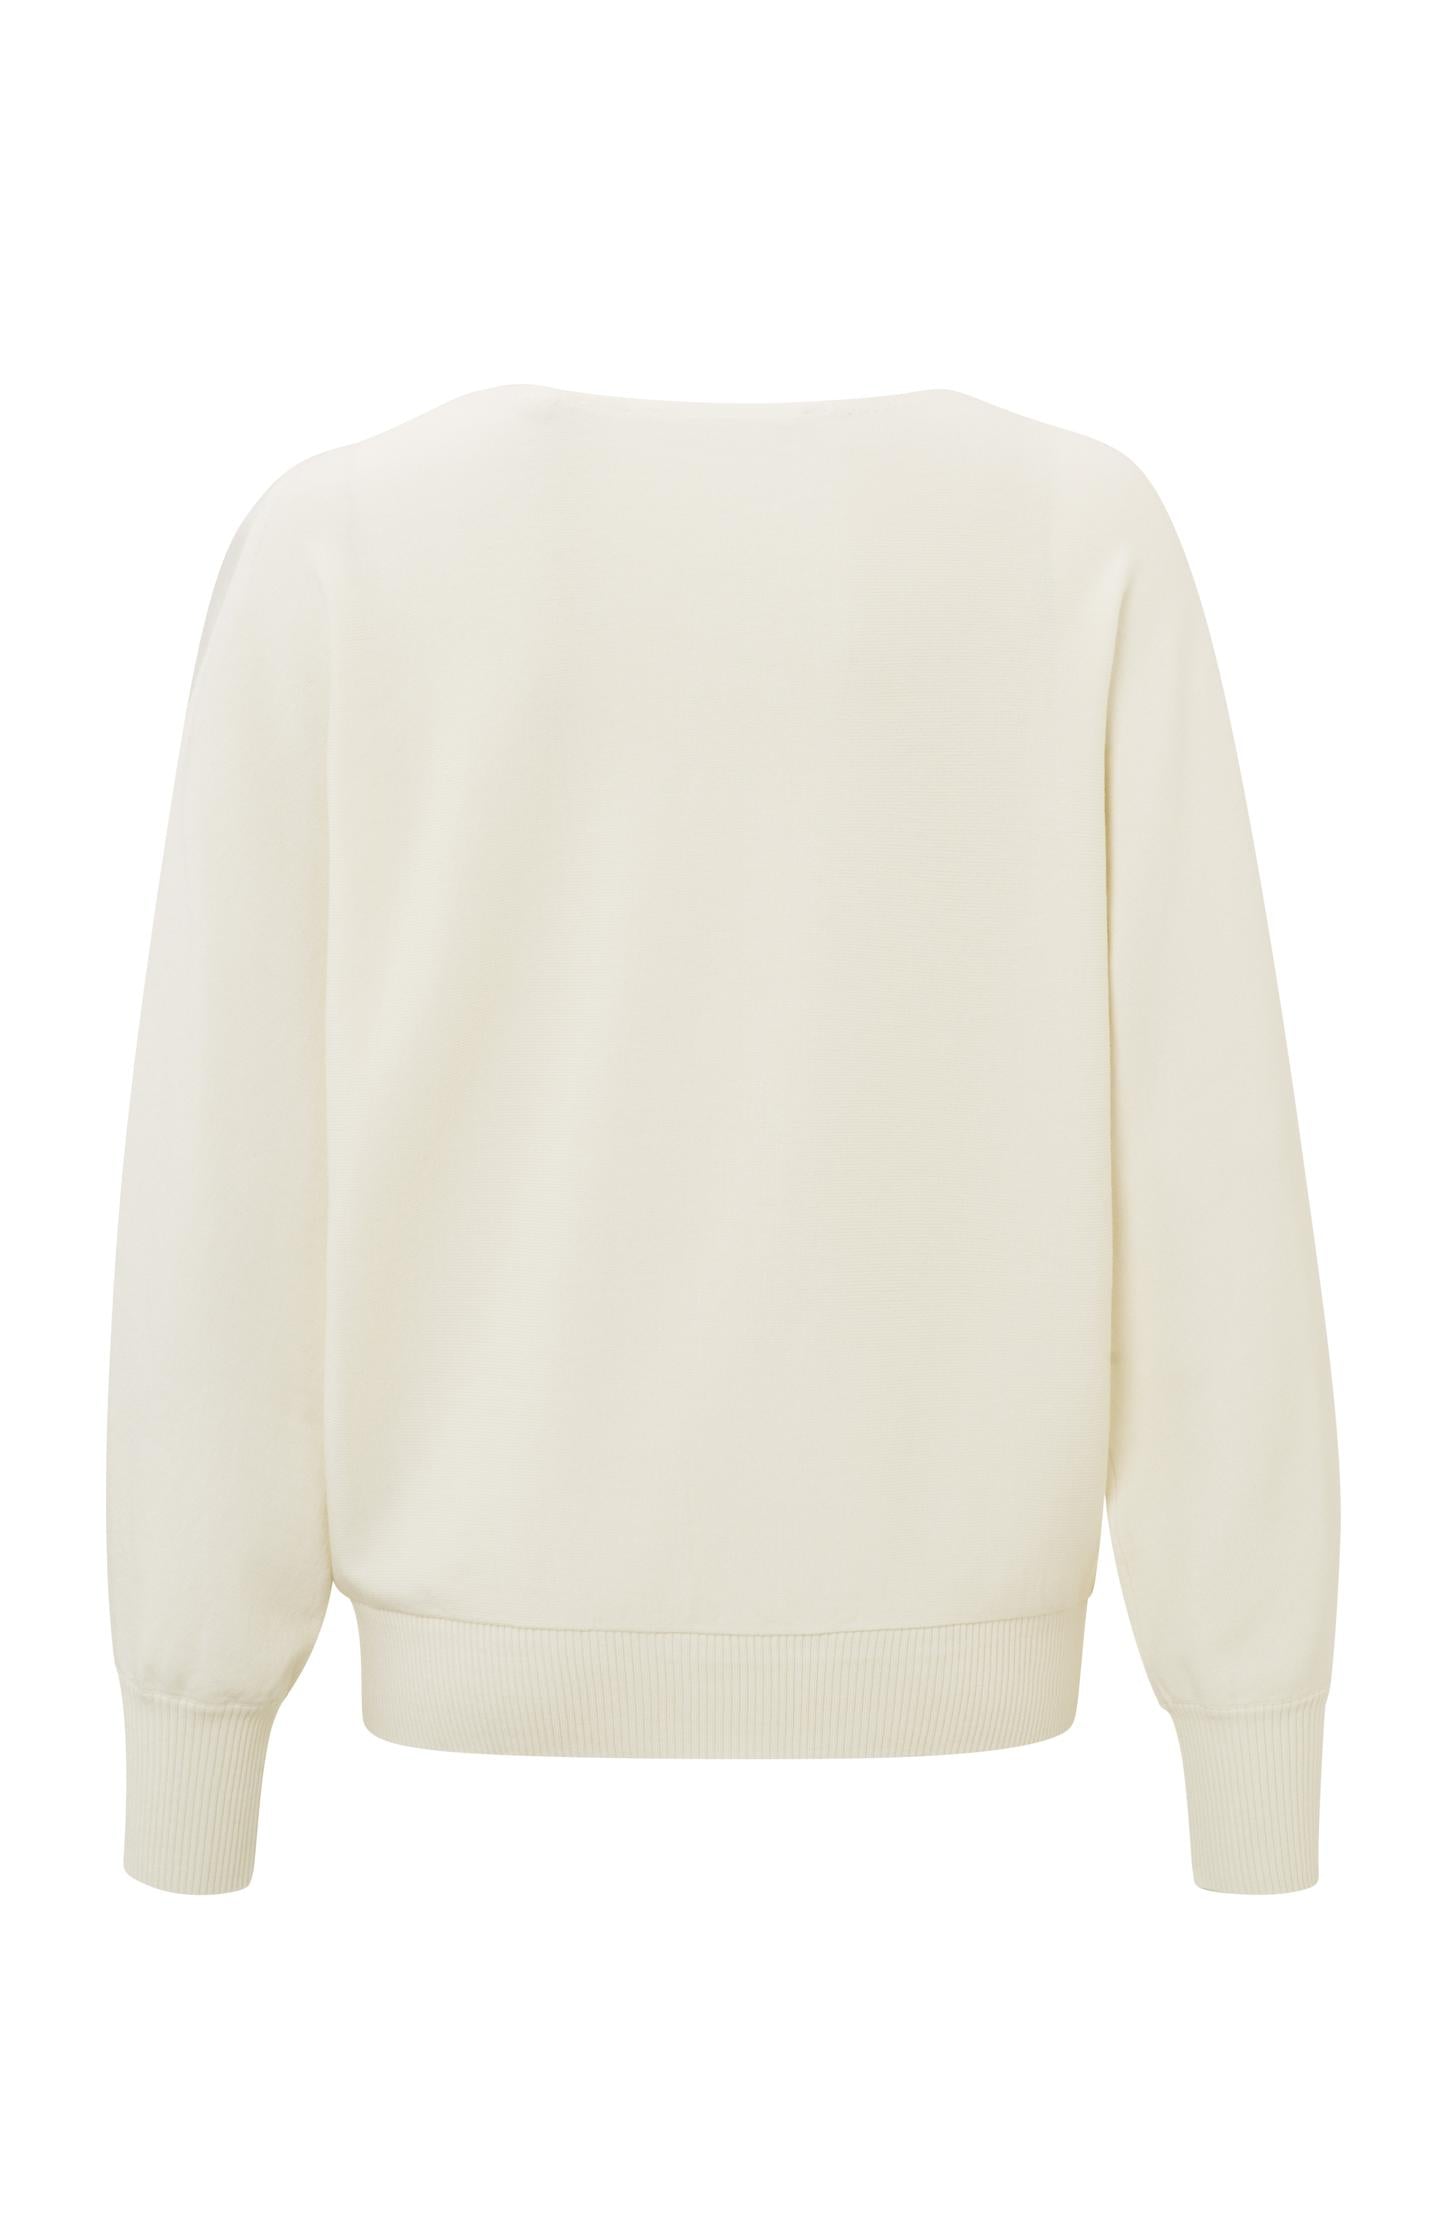 Sweater with boat neck, long sleeves and open shoulder